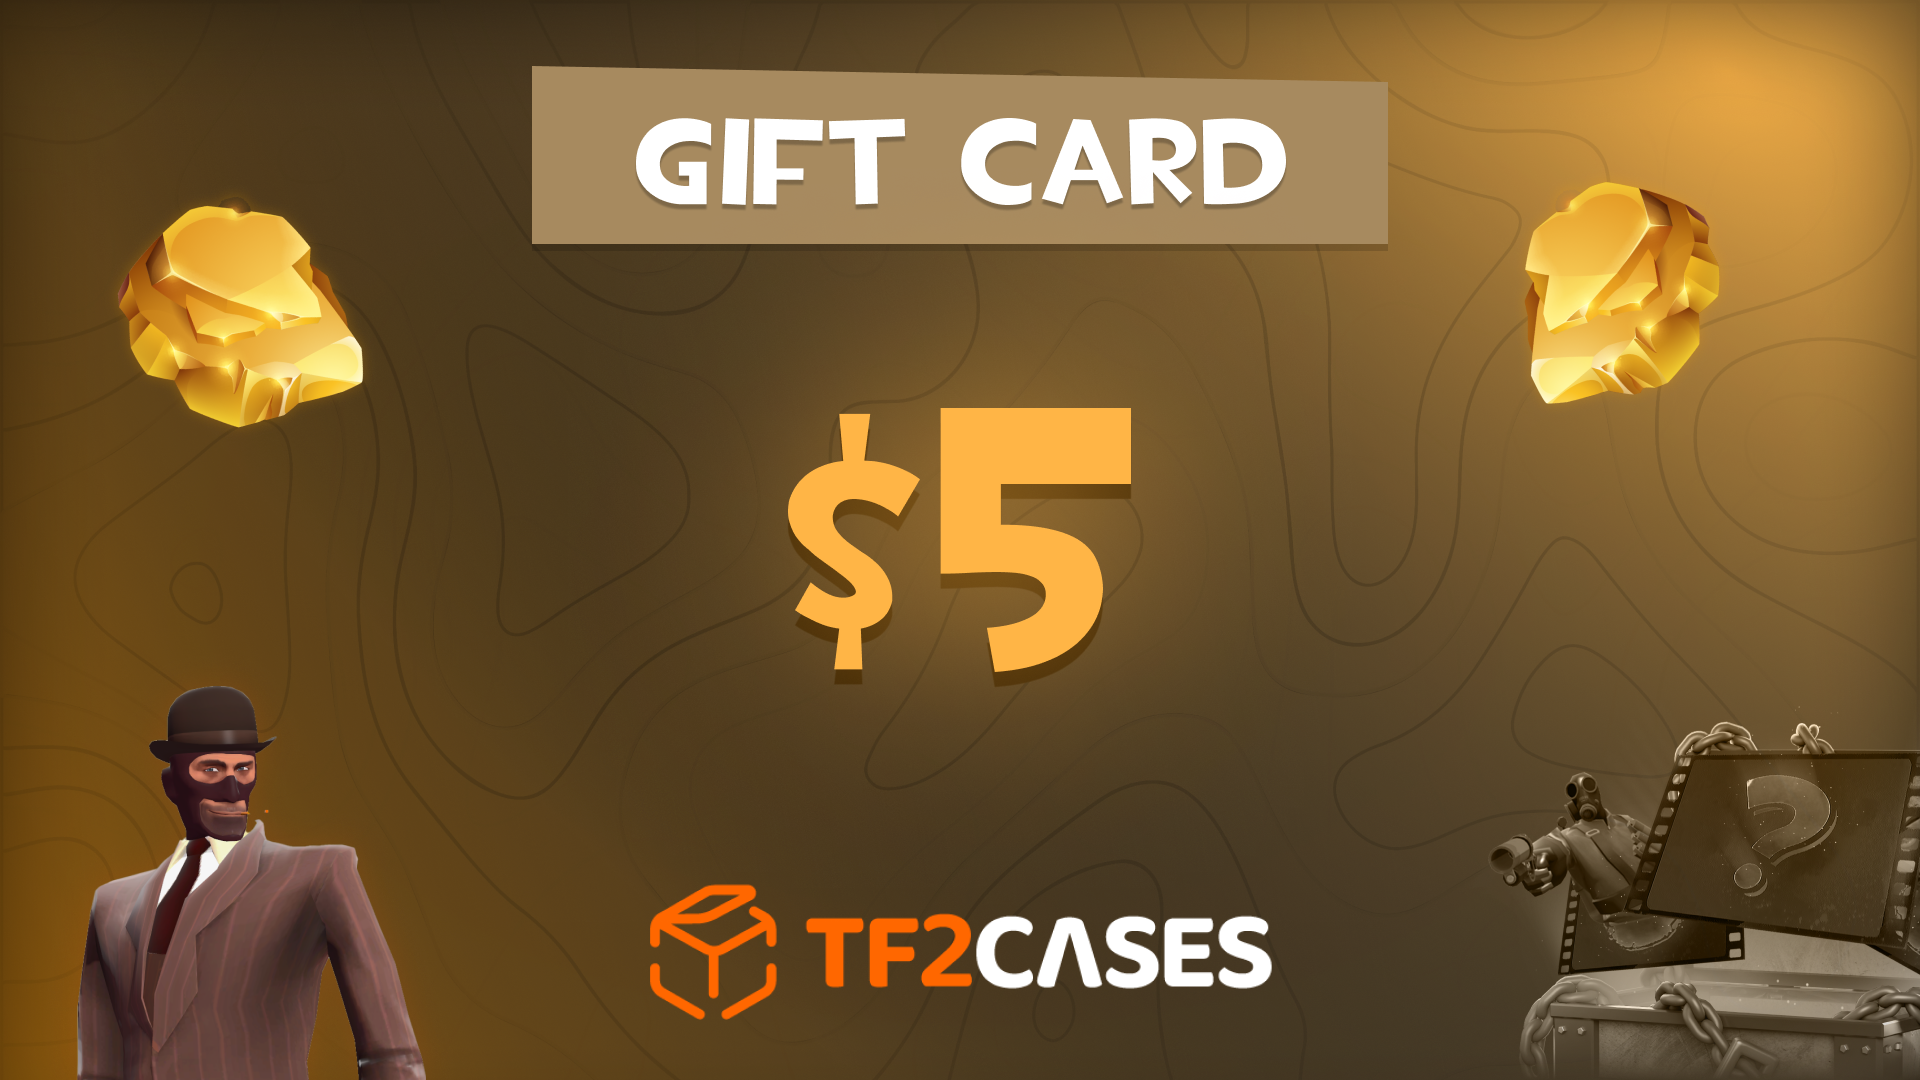 TF2CASES.com $5 Gift Card, 5.65 usd